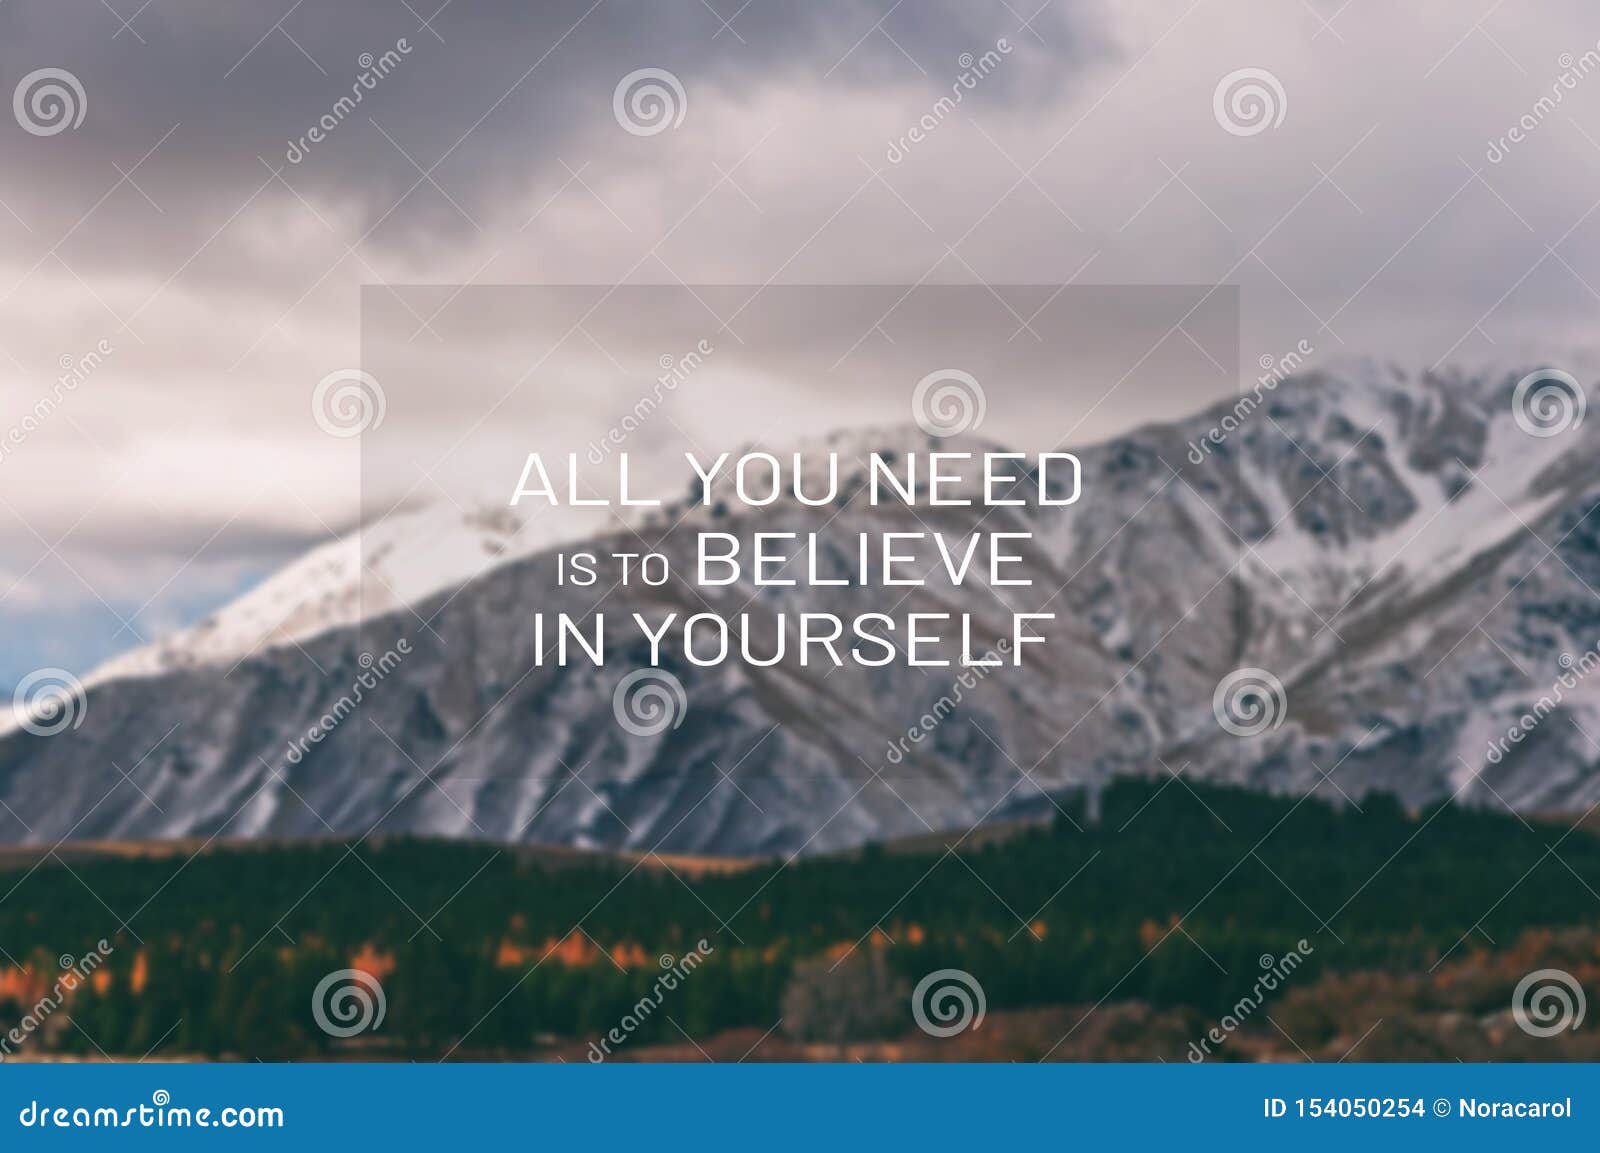 Life Quotes - All You Need is To Believe in Yourself Stock Photo ...